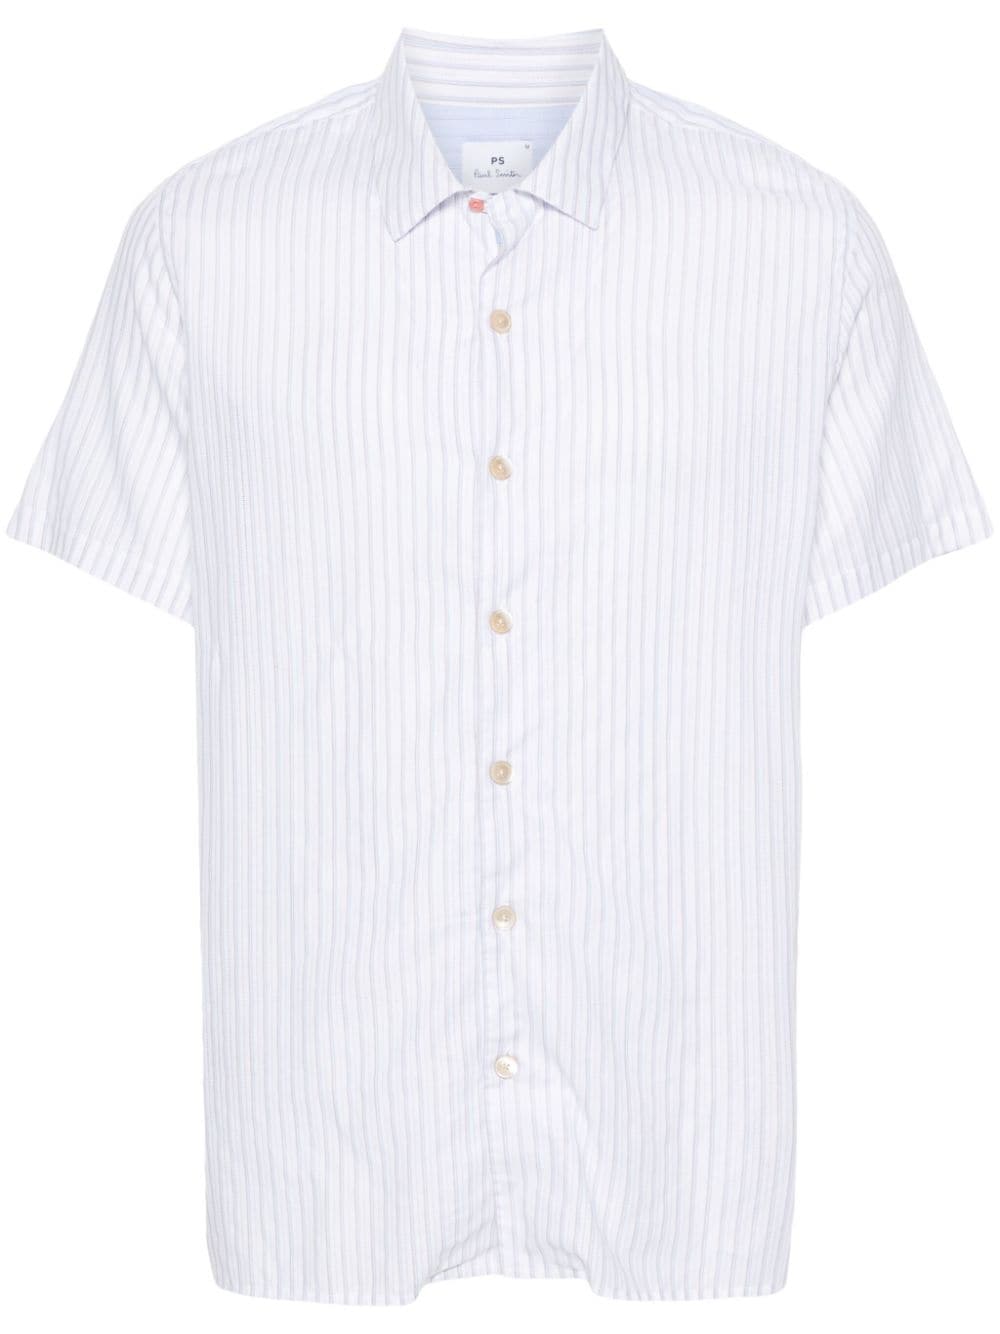 Ps By Paul Smith Halo-stripe Cotton Shirt In Weiss